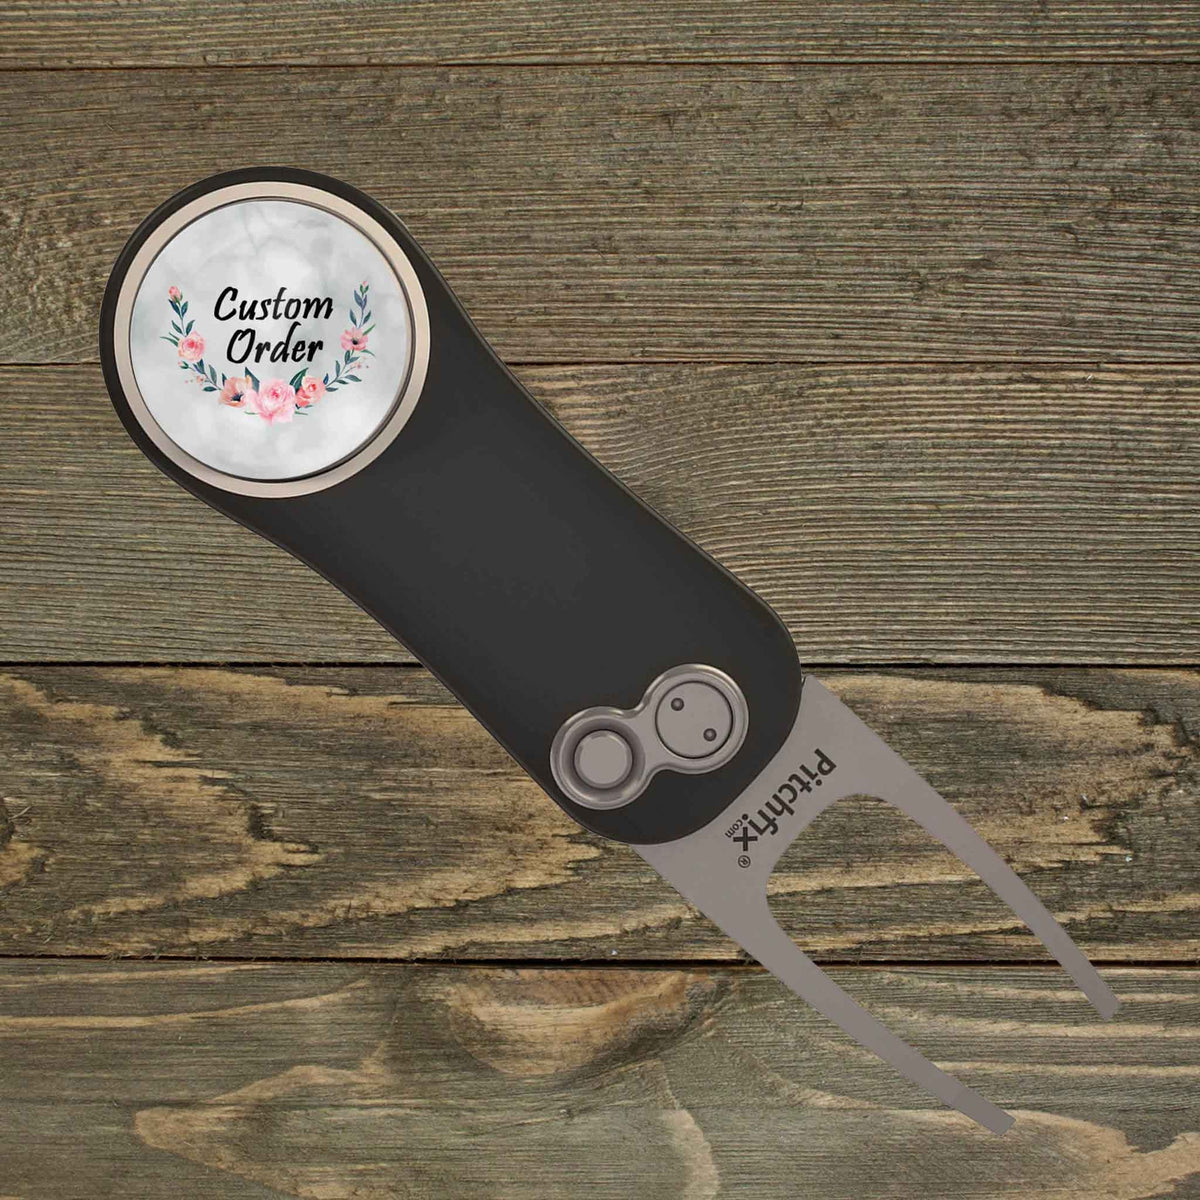 Personalized PitchFix Divot Tool | Golf Accessories | Golf Gifts | Custom Order